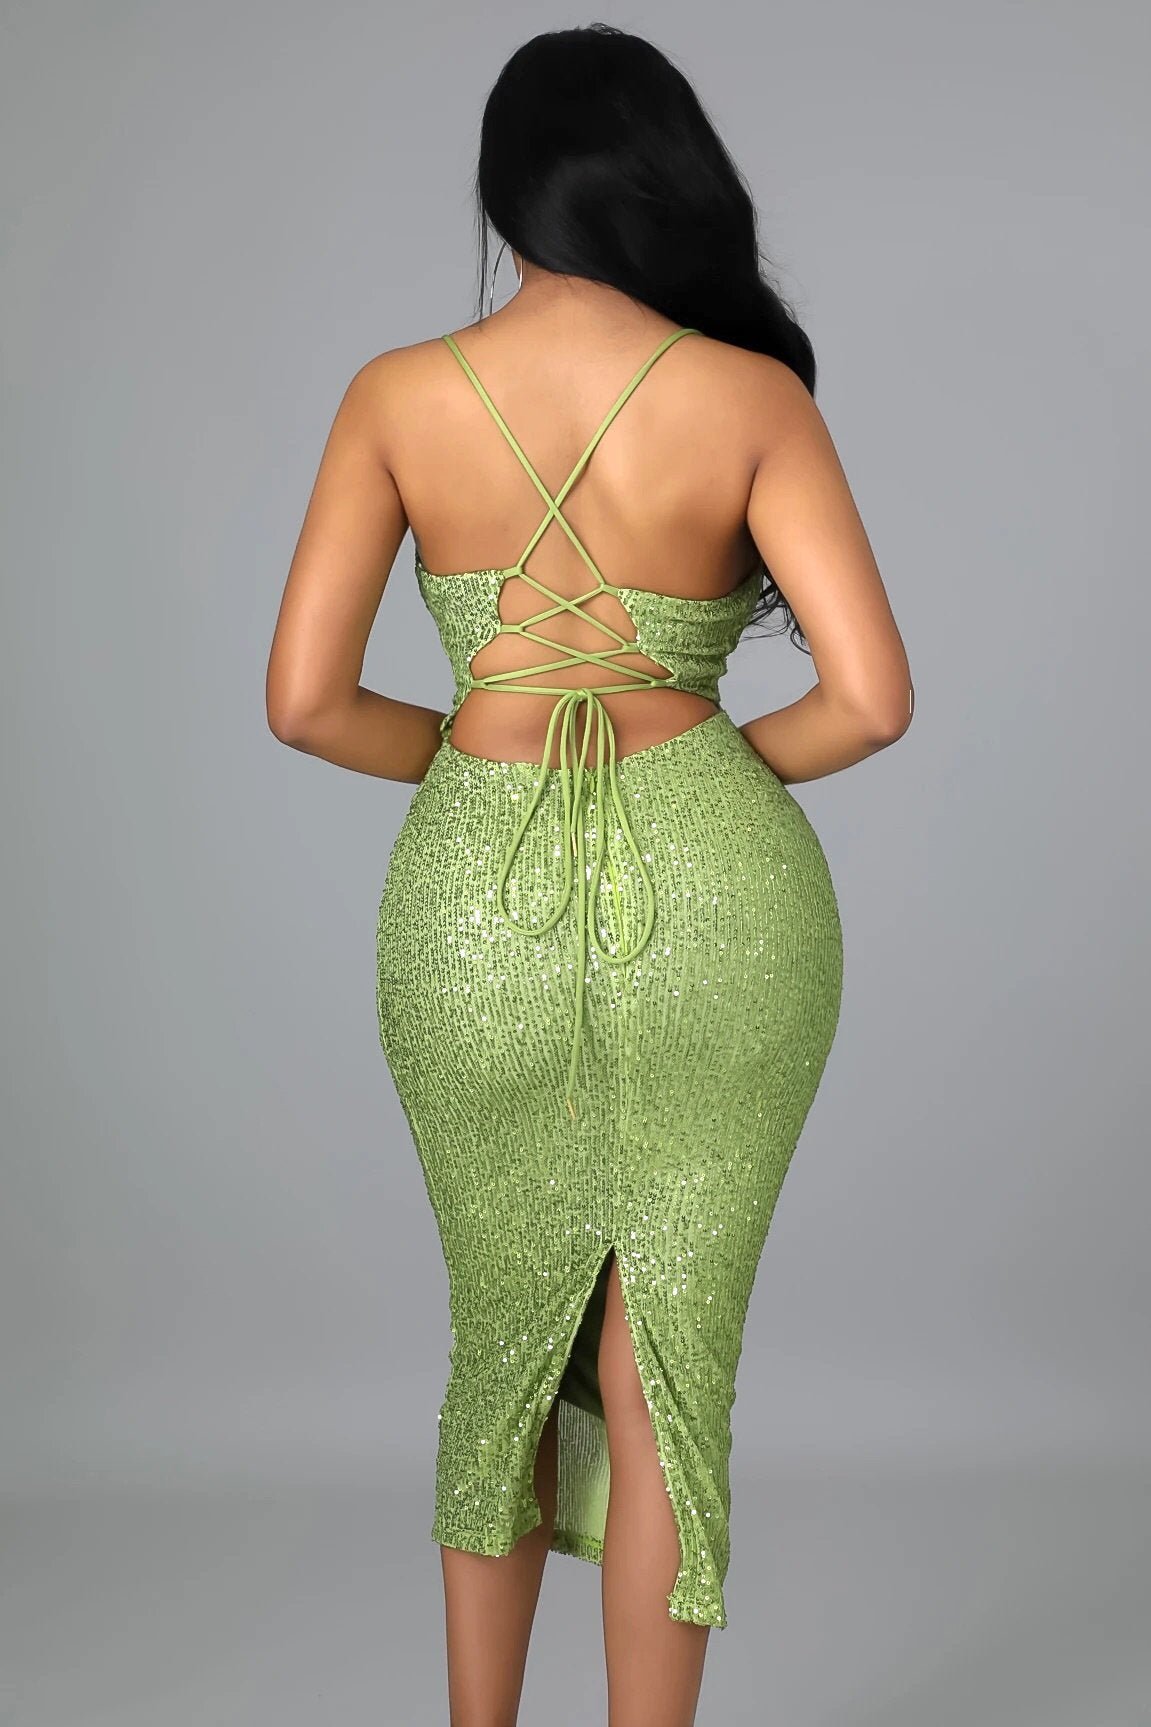 Empire State Of Mind Sequin Midi Dress Lime Green - Ali’s Couture 